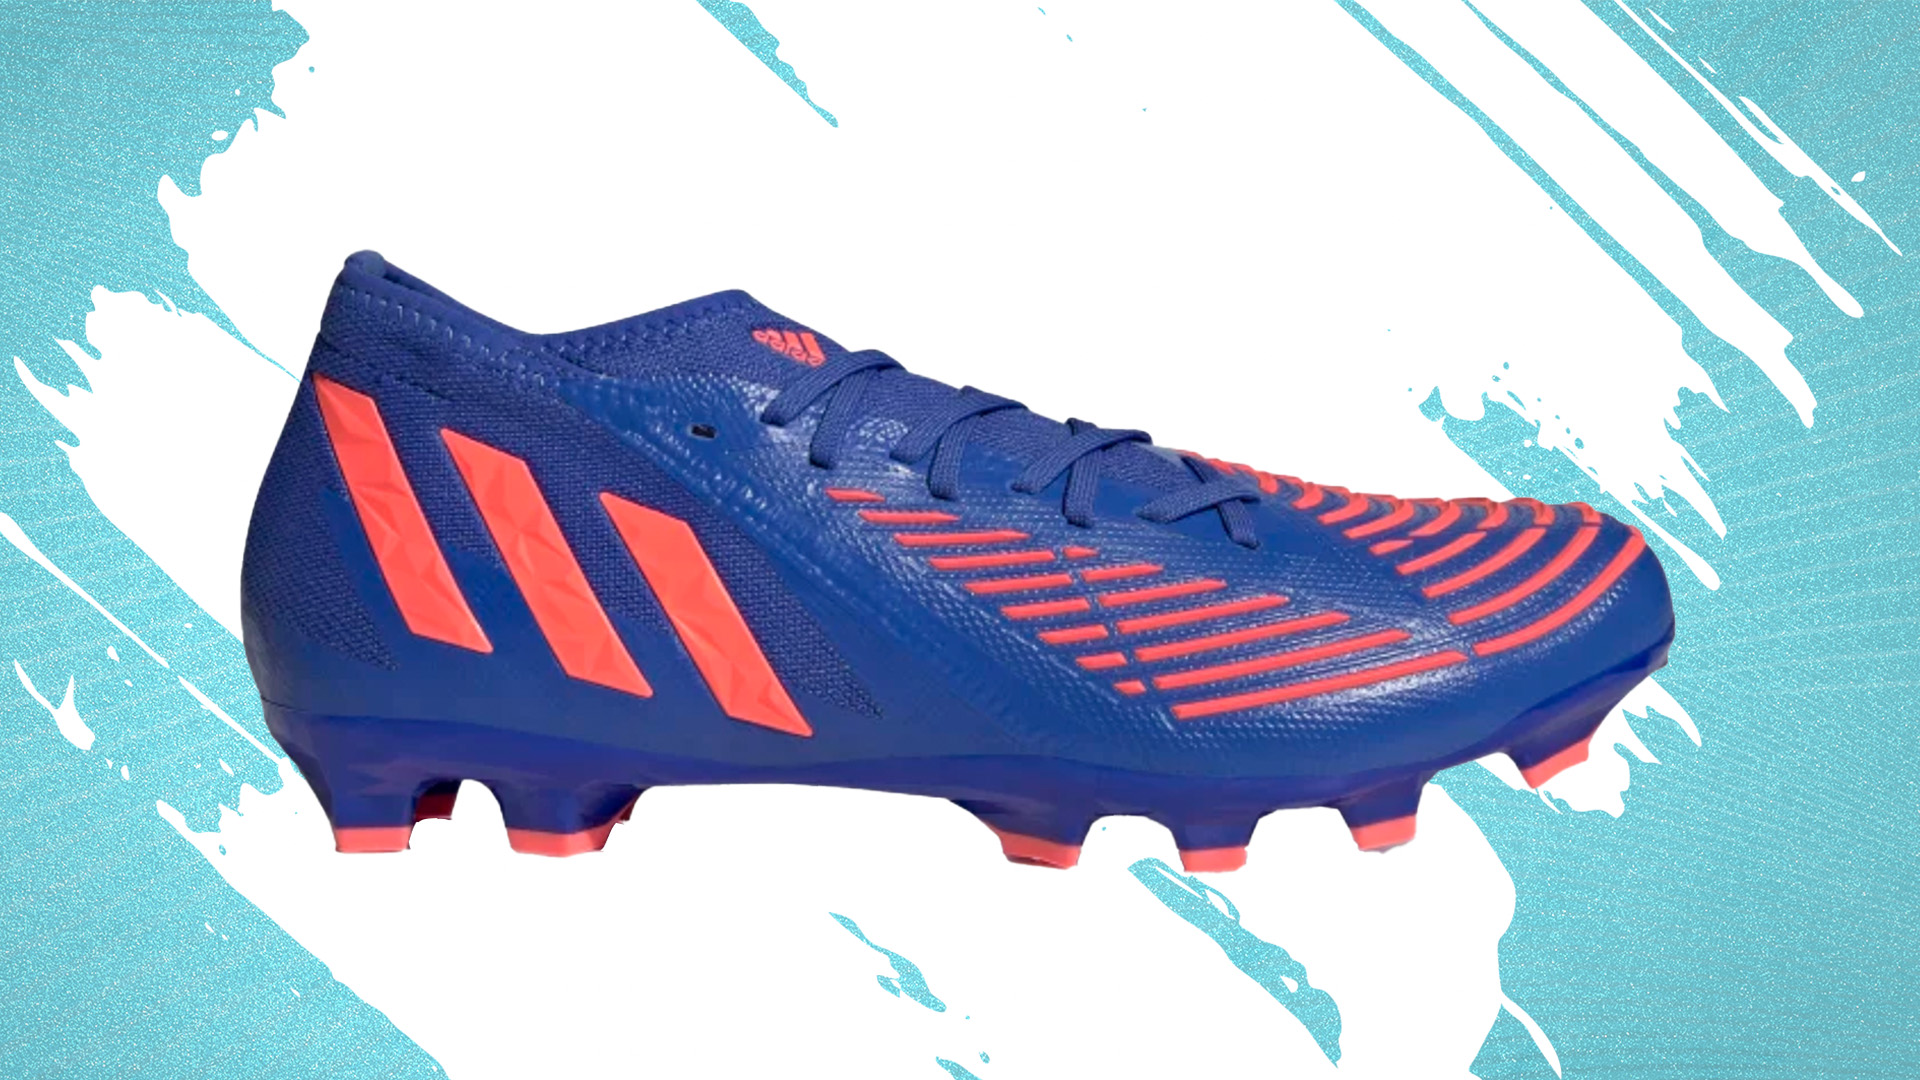 The best adidas football boots you can buy. Goal.com US